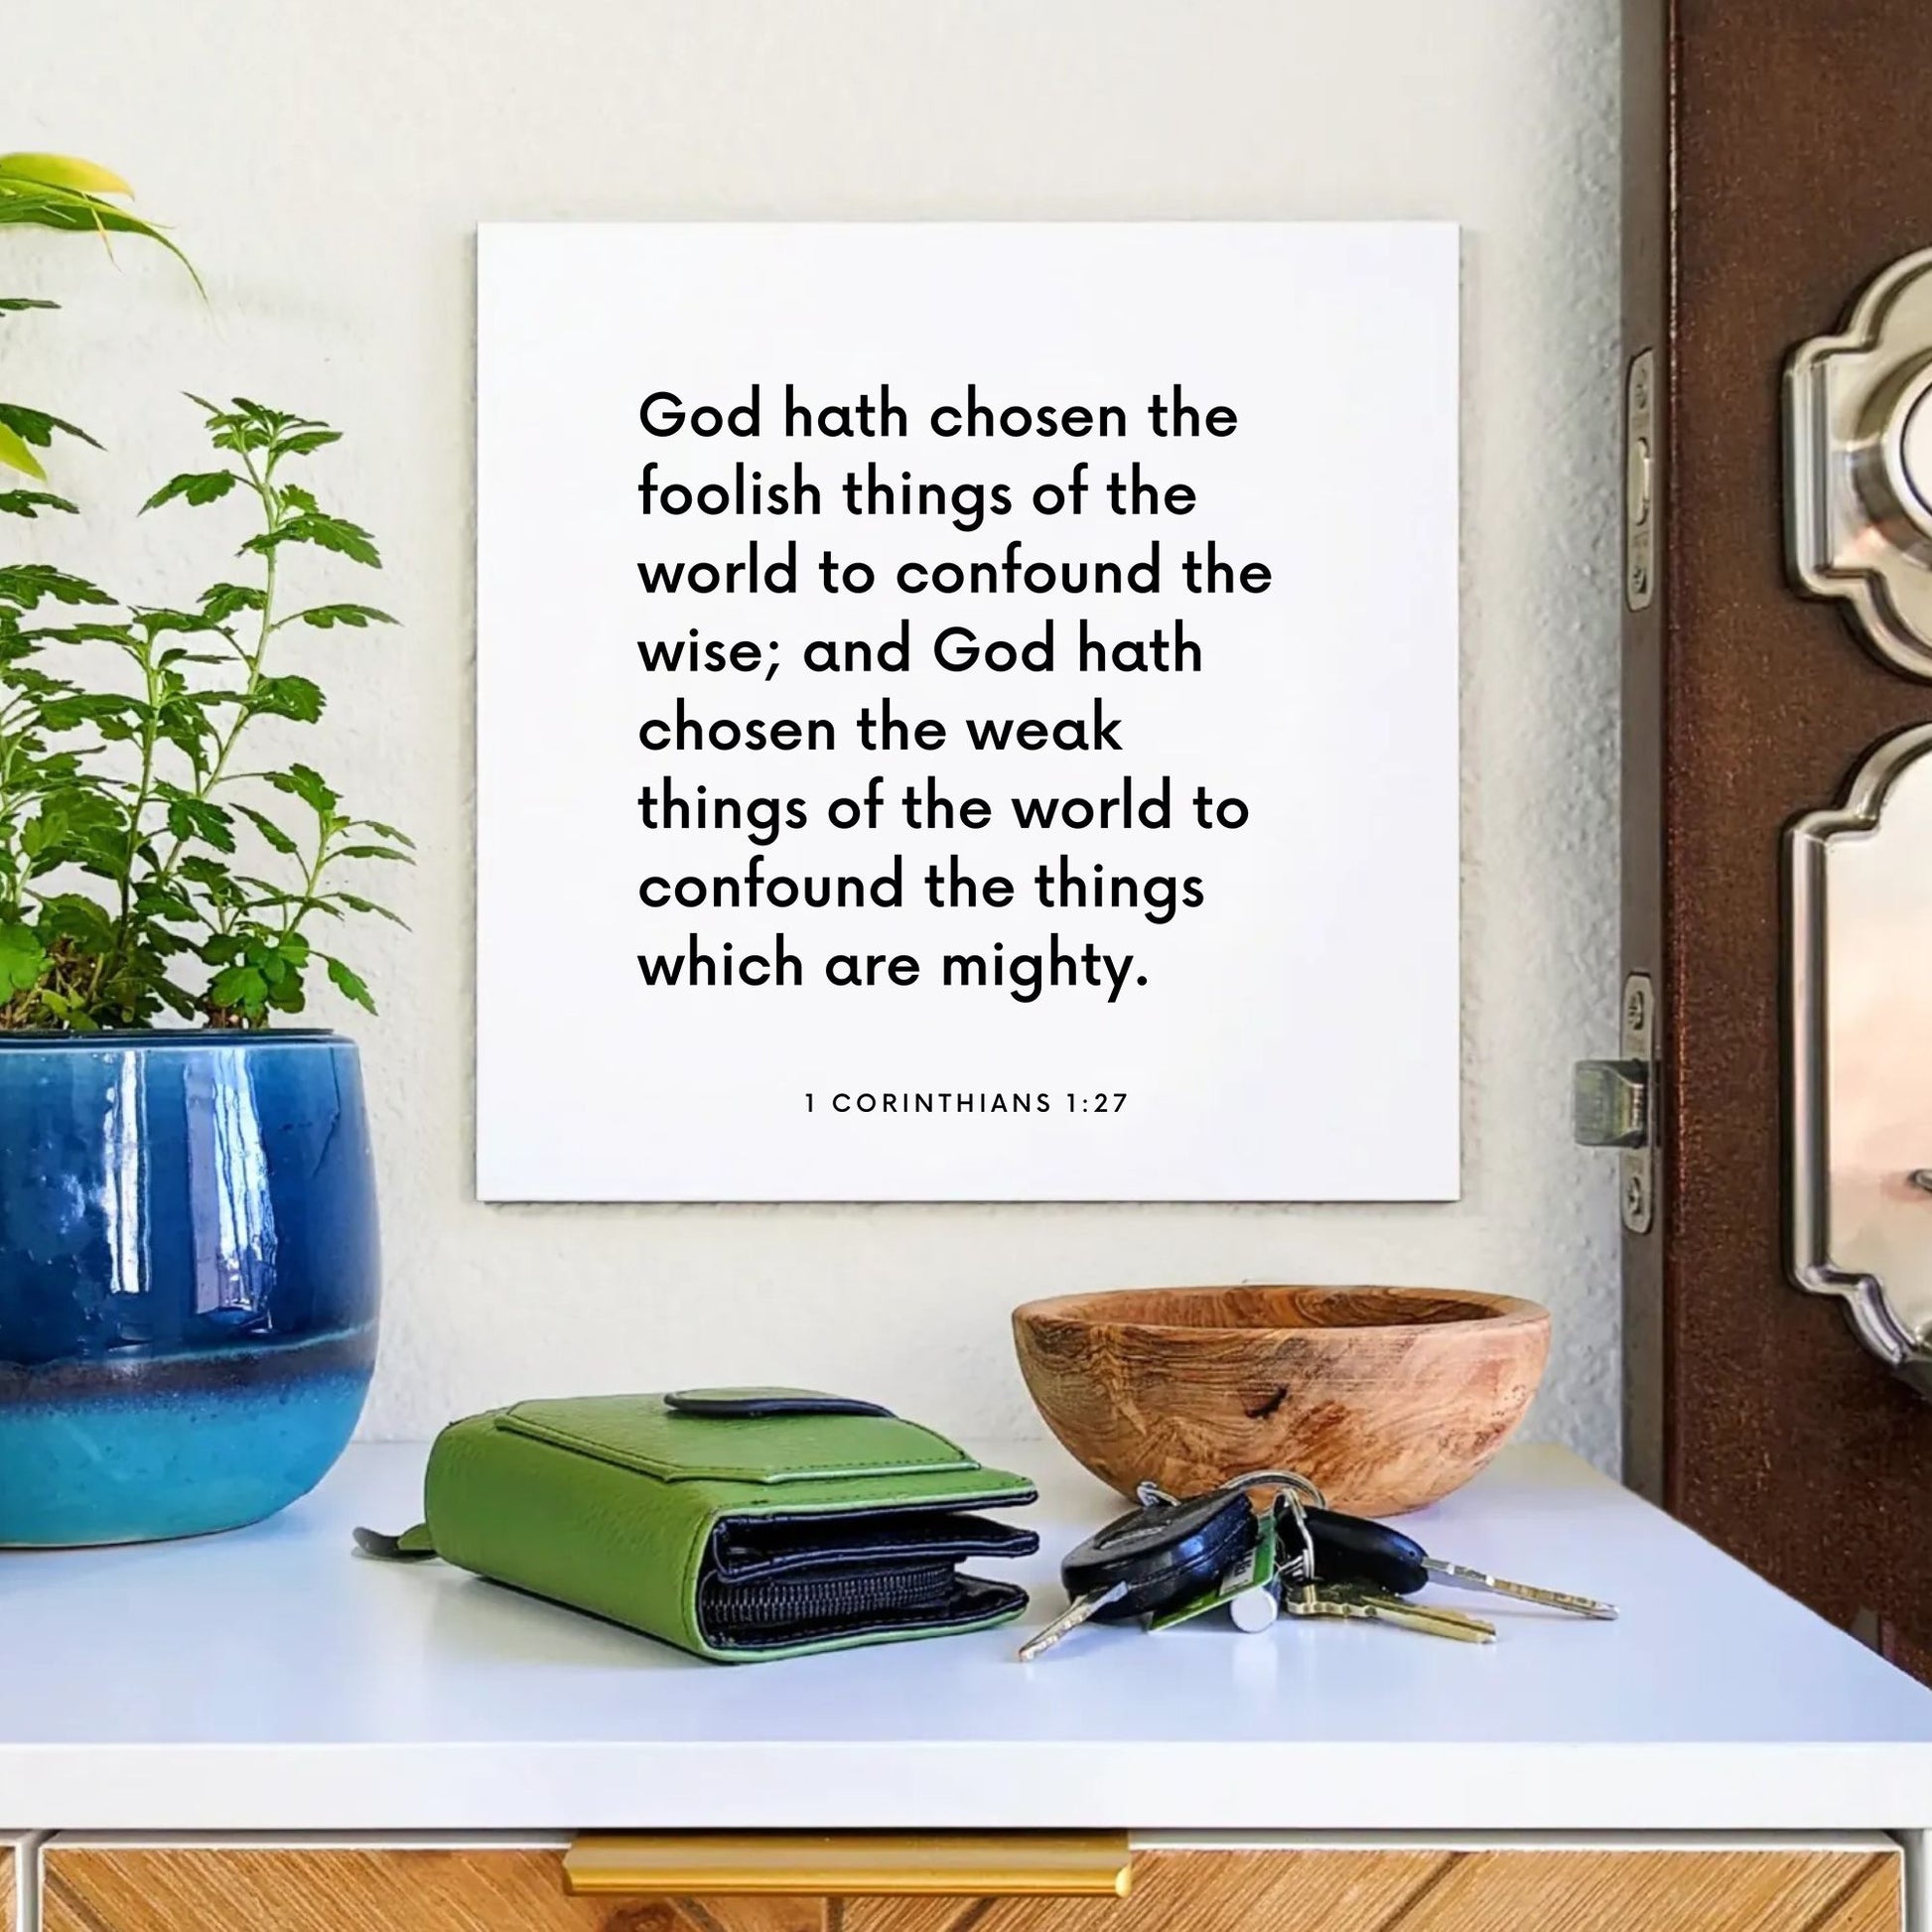 Entryway mouting of the scripture tile for 1 Corinthians 1:27 - "God hath chosen the foolish things of the world"